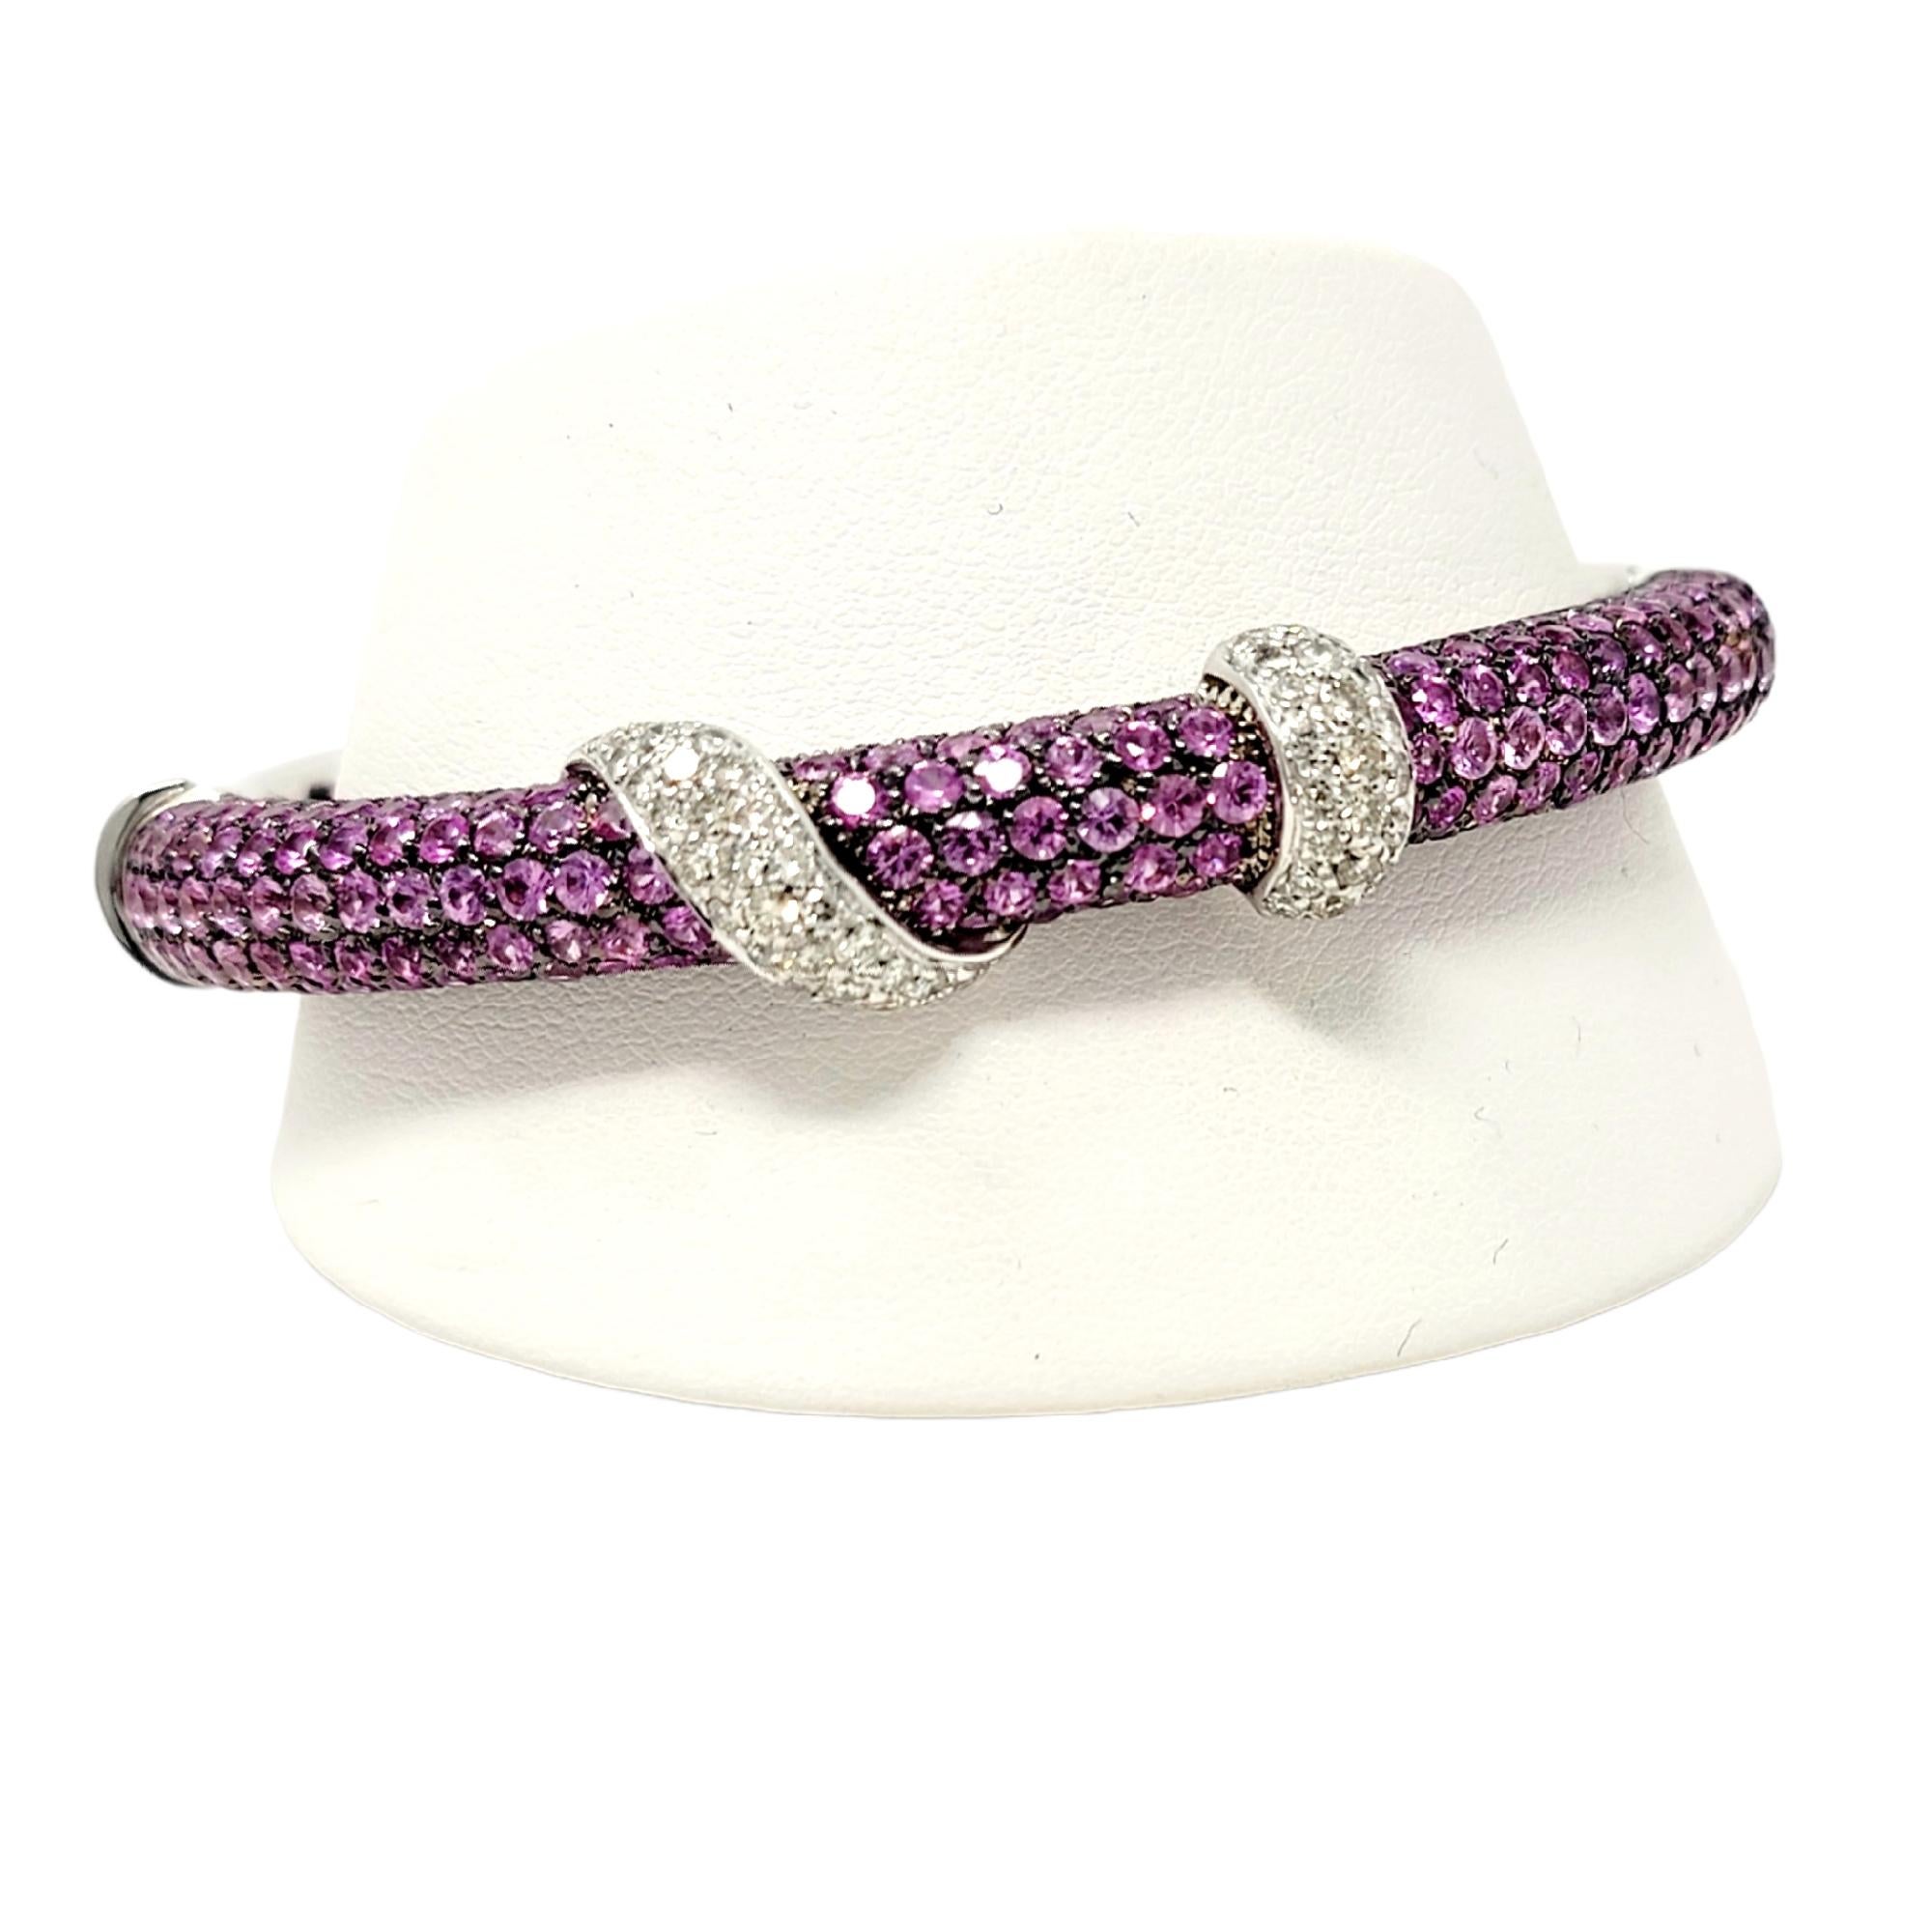 Ultra feminine bracelet by Italian designer Andreoli, featuring glittering pink sapphires and sparkling pave diamonds. This stunning bracelet has a contemporary feel with a sleek and elegant design. It features an impressive 221 round mixed cut